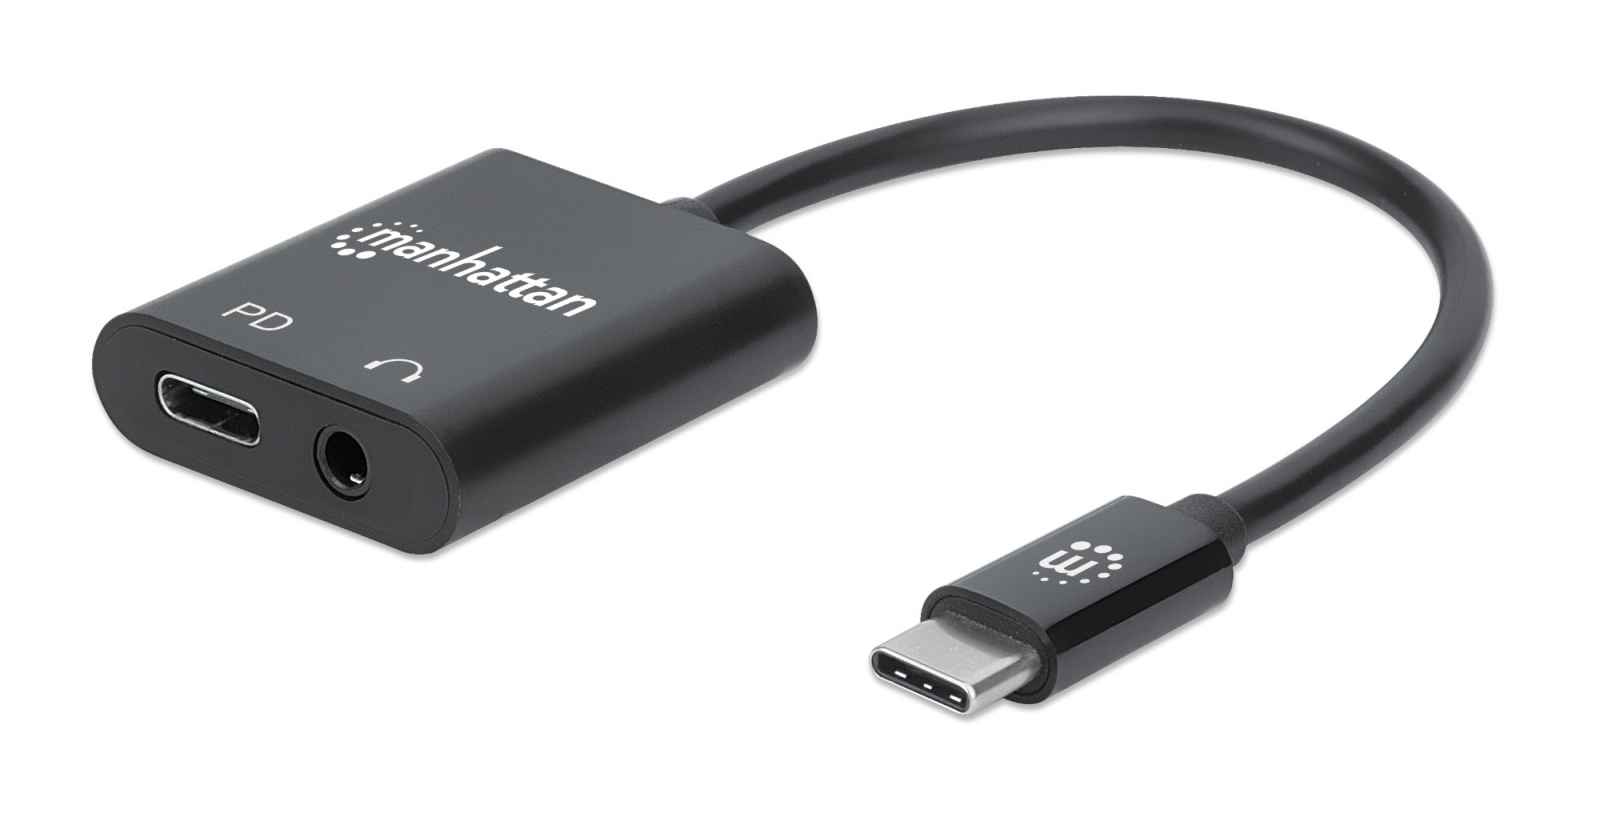 Manhattan USB-C to Headphone Jack (3.5mm) and USB-C (inc Power Delivery), Black, 480 Mbps (USB 2.0), Cable 11cm, Audio, With Power Delivery to USB-C Port (60W), Equivalent to Startech CDP235APDM , Three Year Warranty, Retail Box